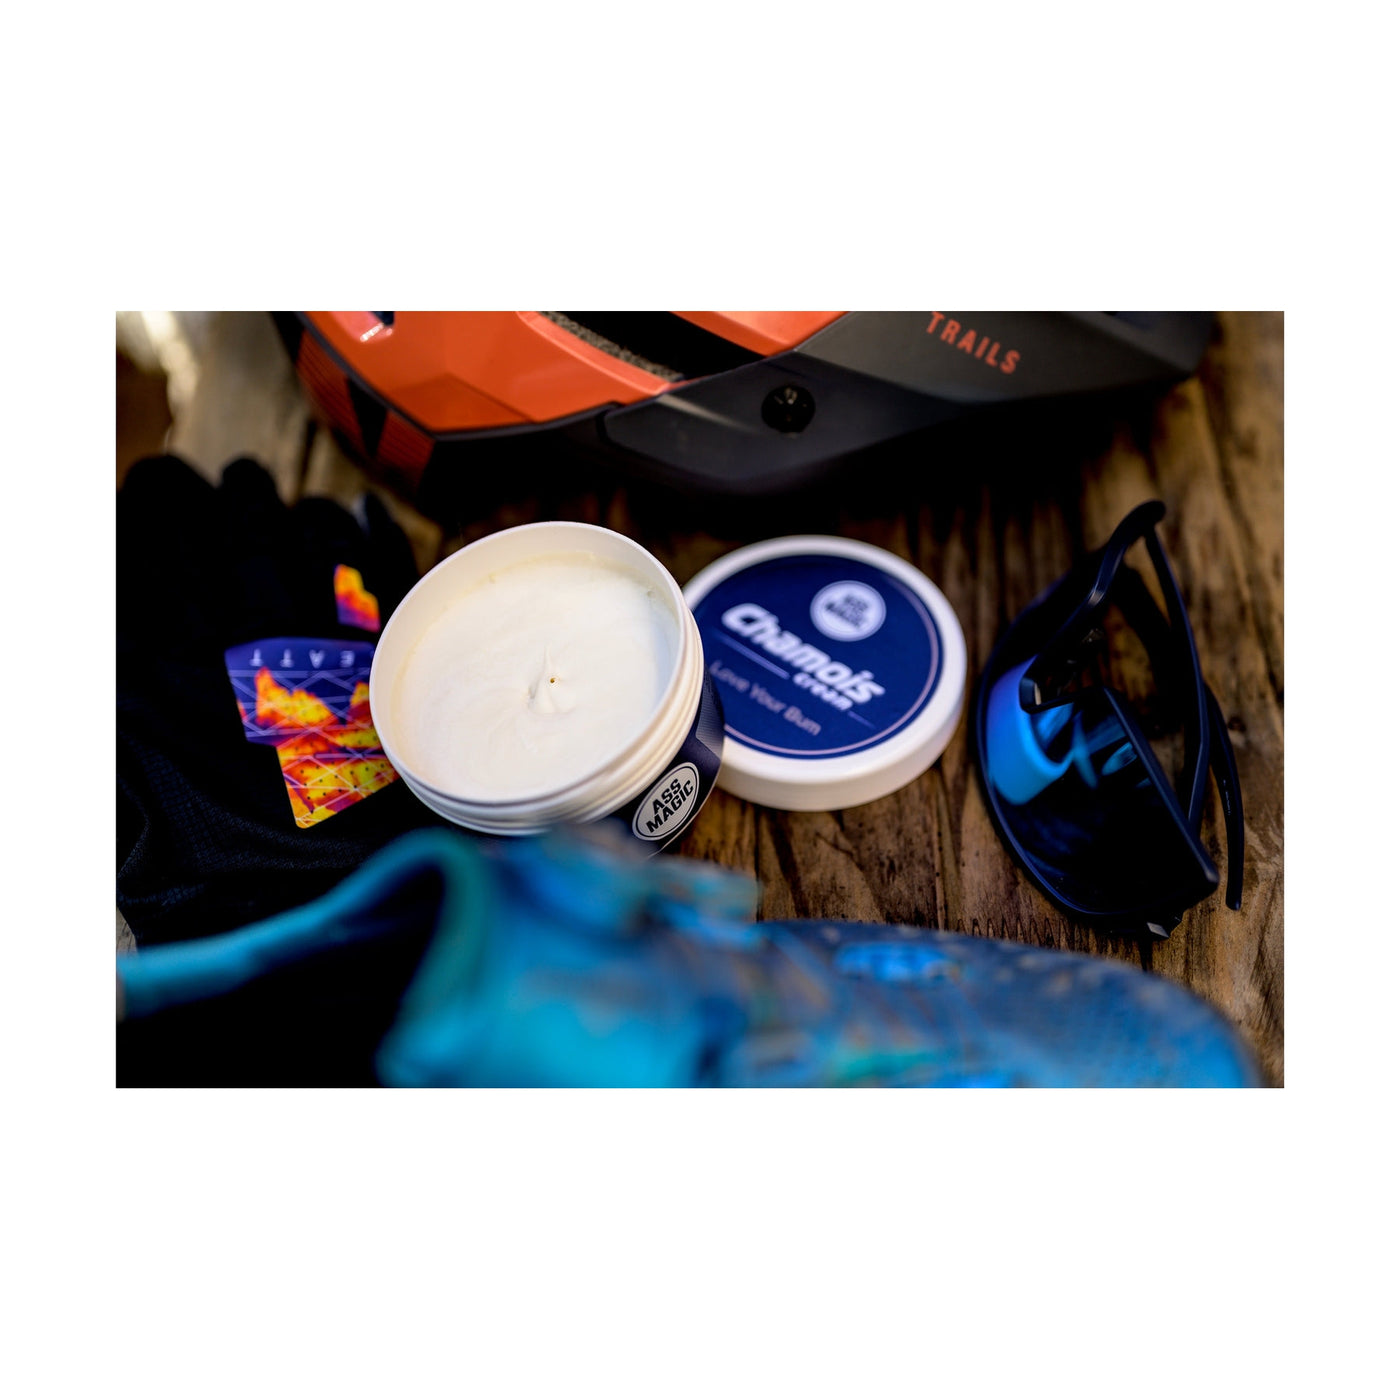 , ASS MAGIC Chamois Cream is the finest anti-chafe cream for your nether regions. ASS MAGIC has been formulated and field tested by industry leading experts and athletes, so that your sporting activities are done in comfort.